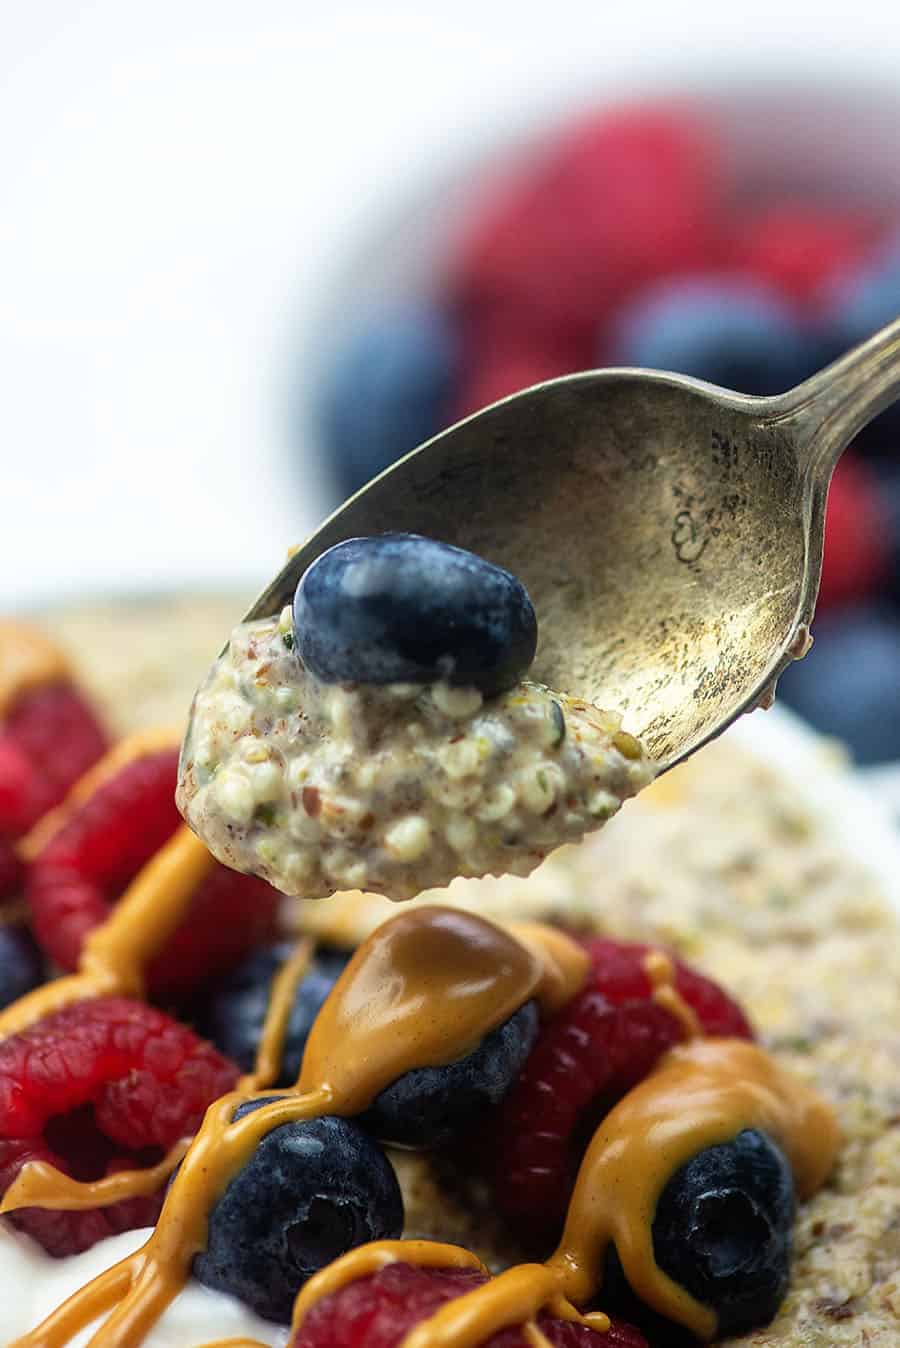 A close up of a blueberry and oatmeal on an old silver spoon.